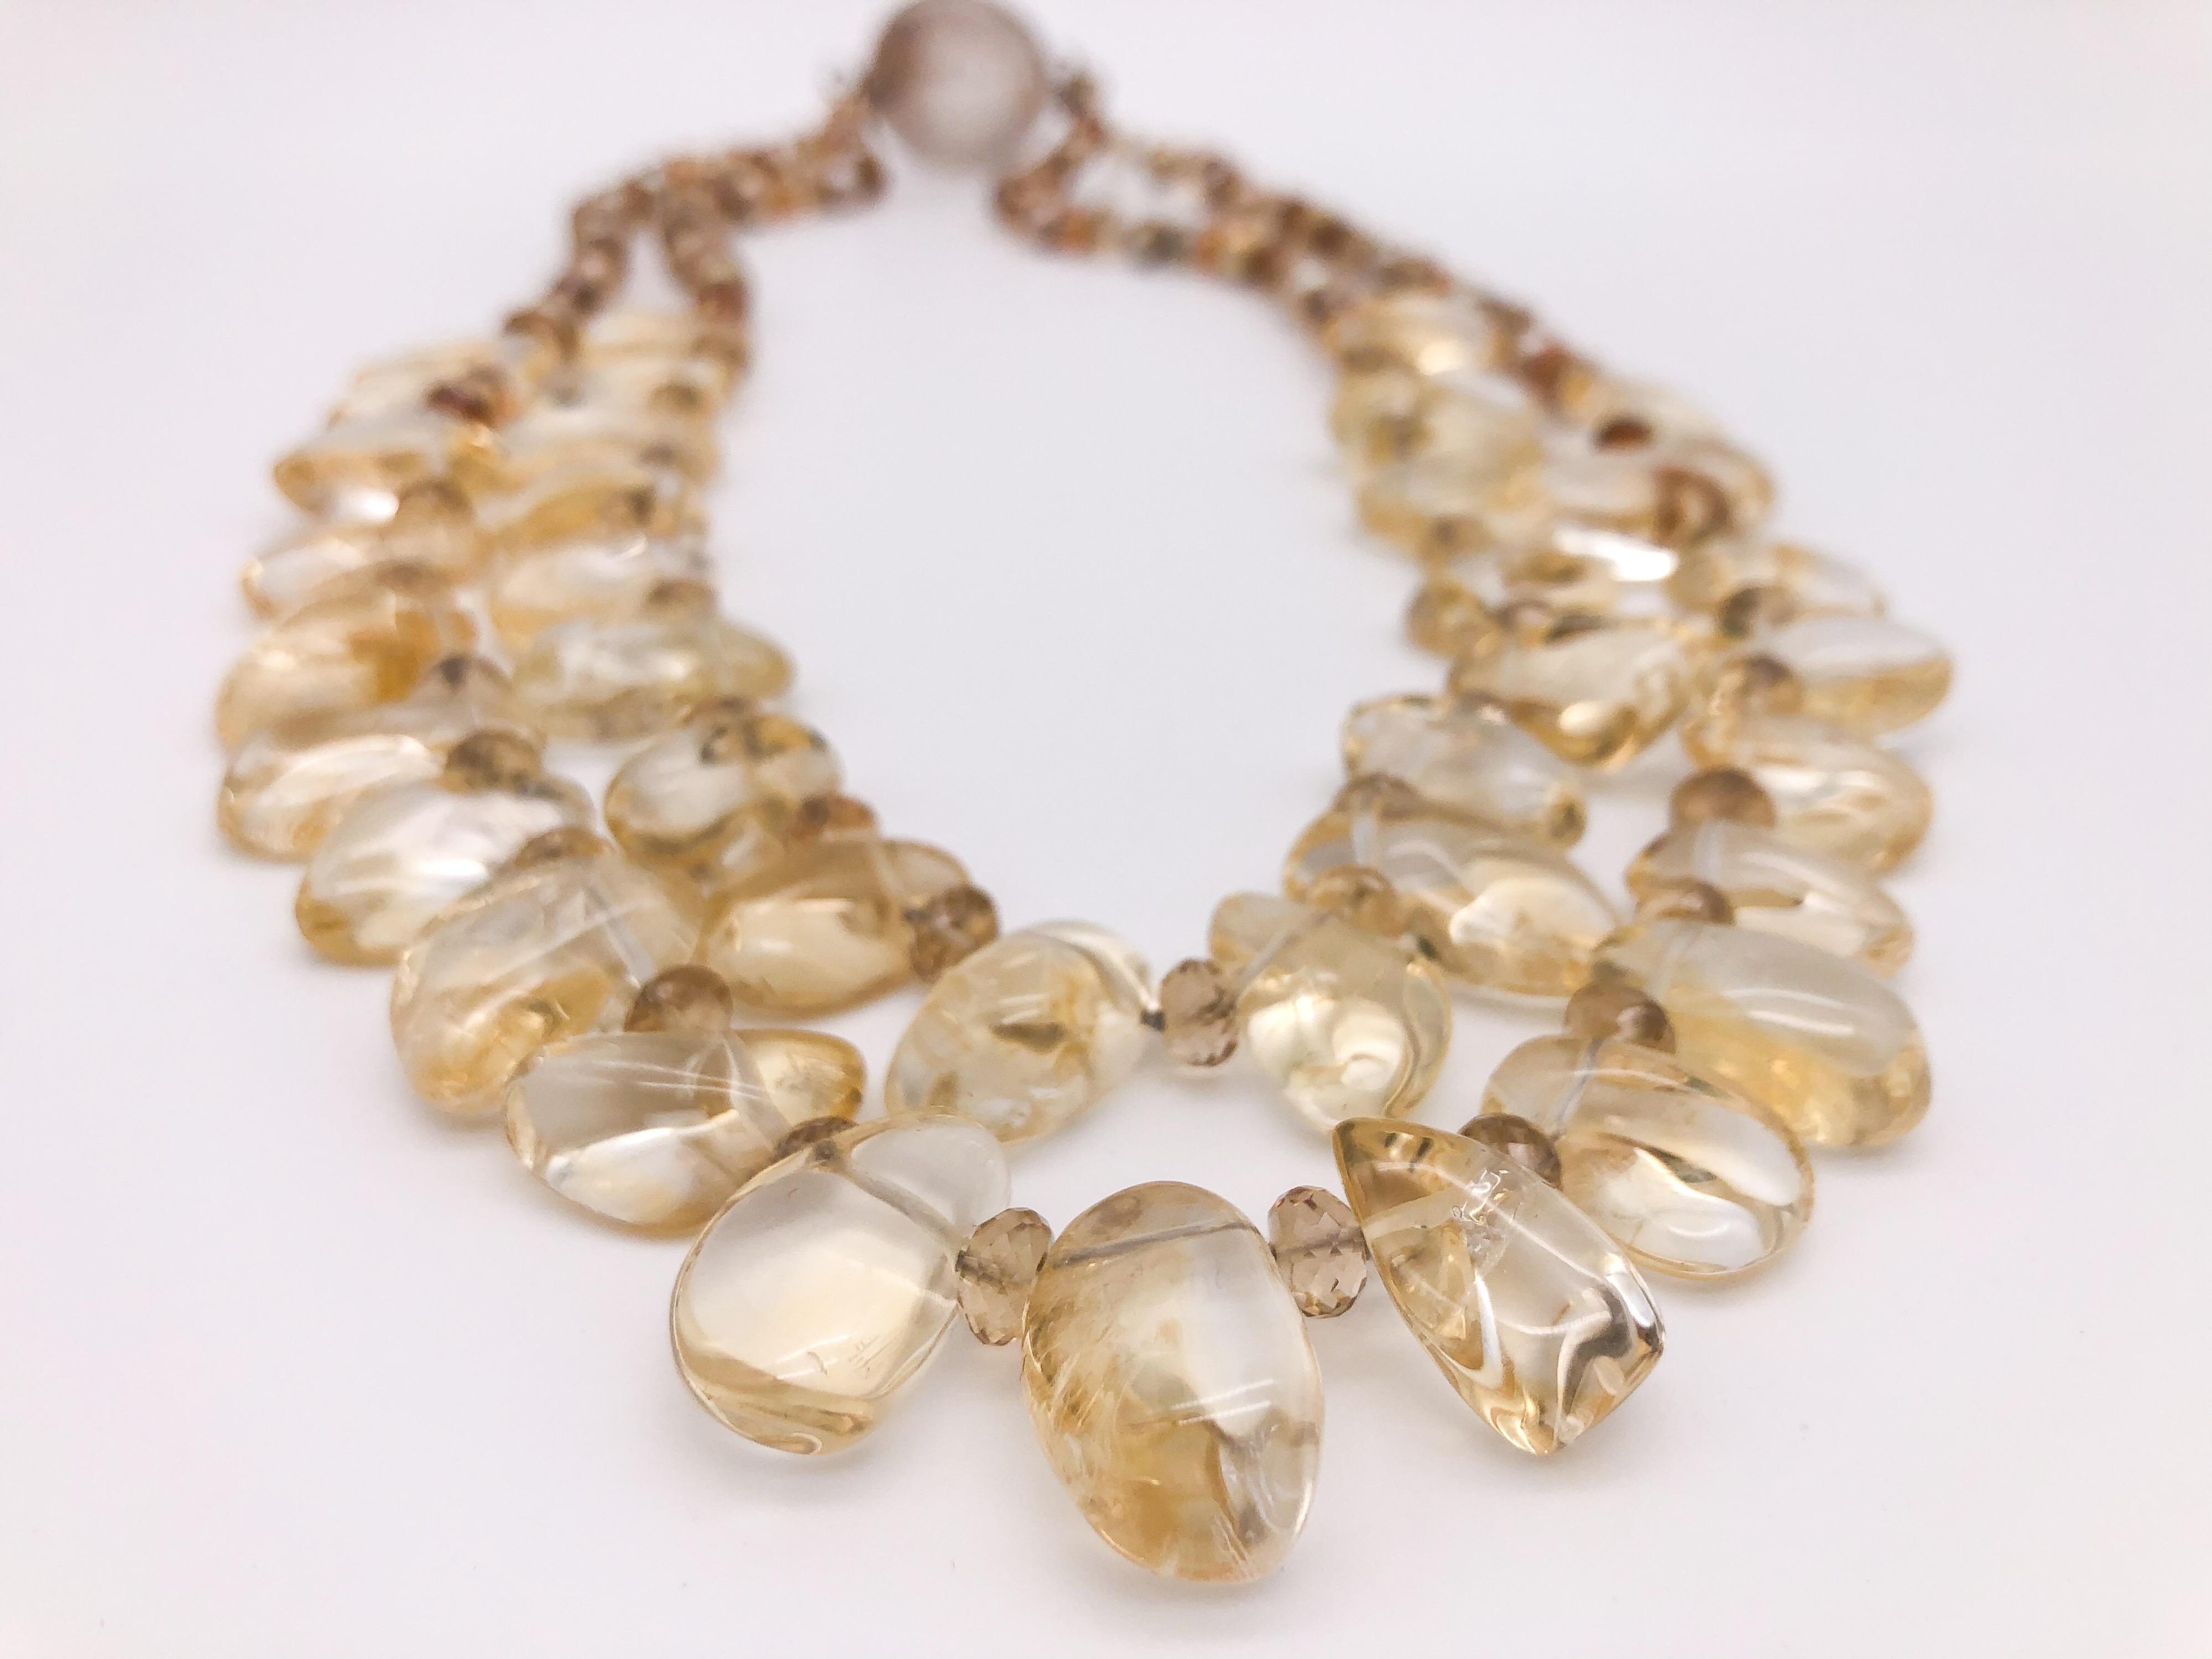 Mixed Cut A.Jeschel 2 strand Citrine and Pearl necklace.  For Sale